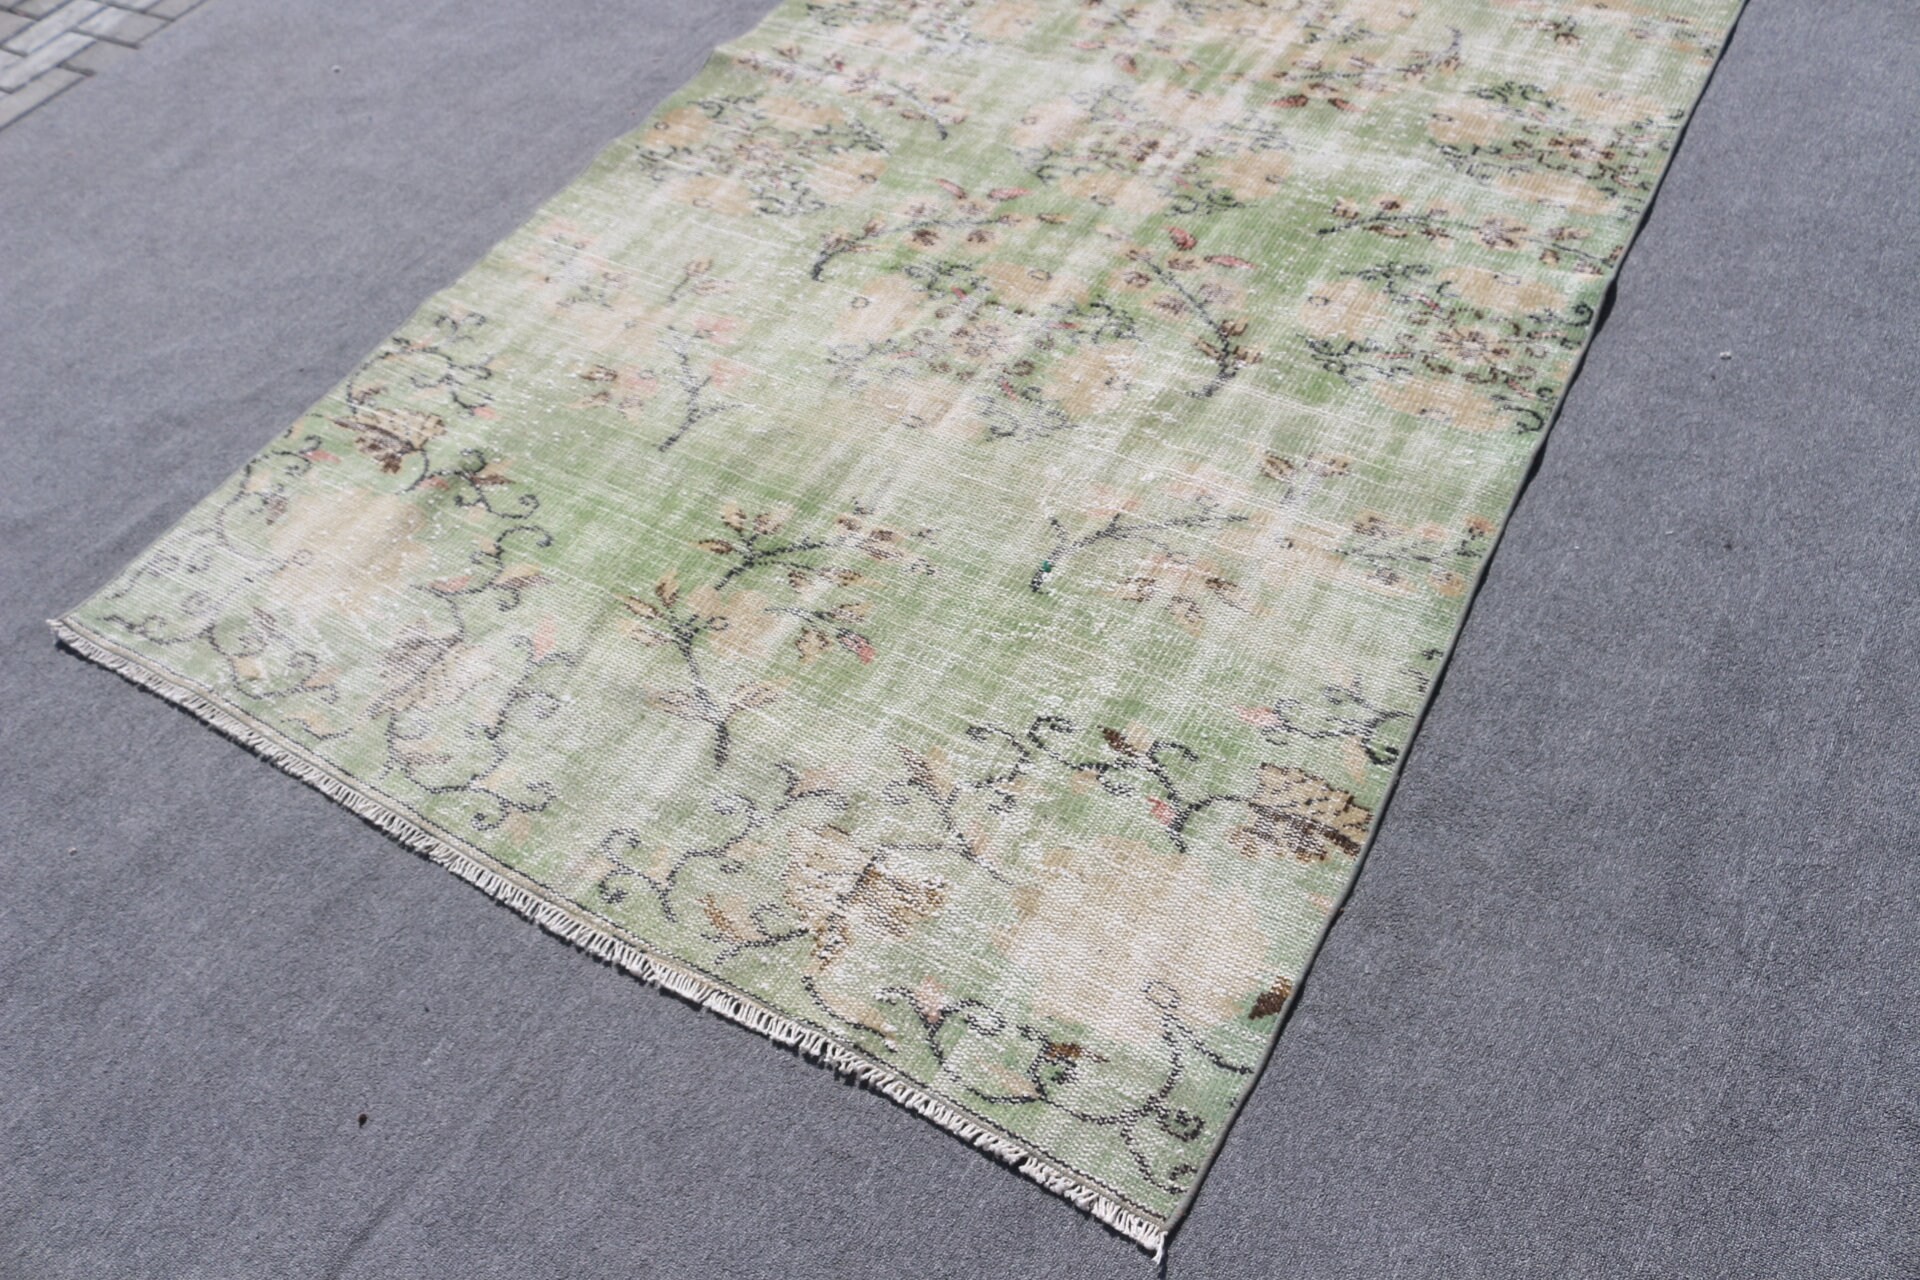 4.9x8.7 ft Large Rug, Cool Rug, Turkish Rugs, Abstract Rug, Dining Room Rugs, Vintage Rugs, Home Decor Rugs, Green Antique Rug, Bedroom Rug